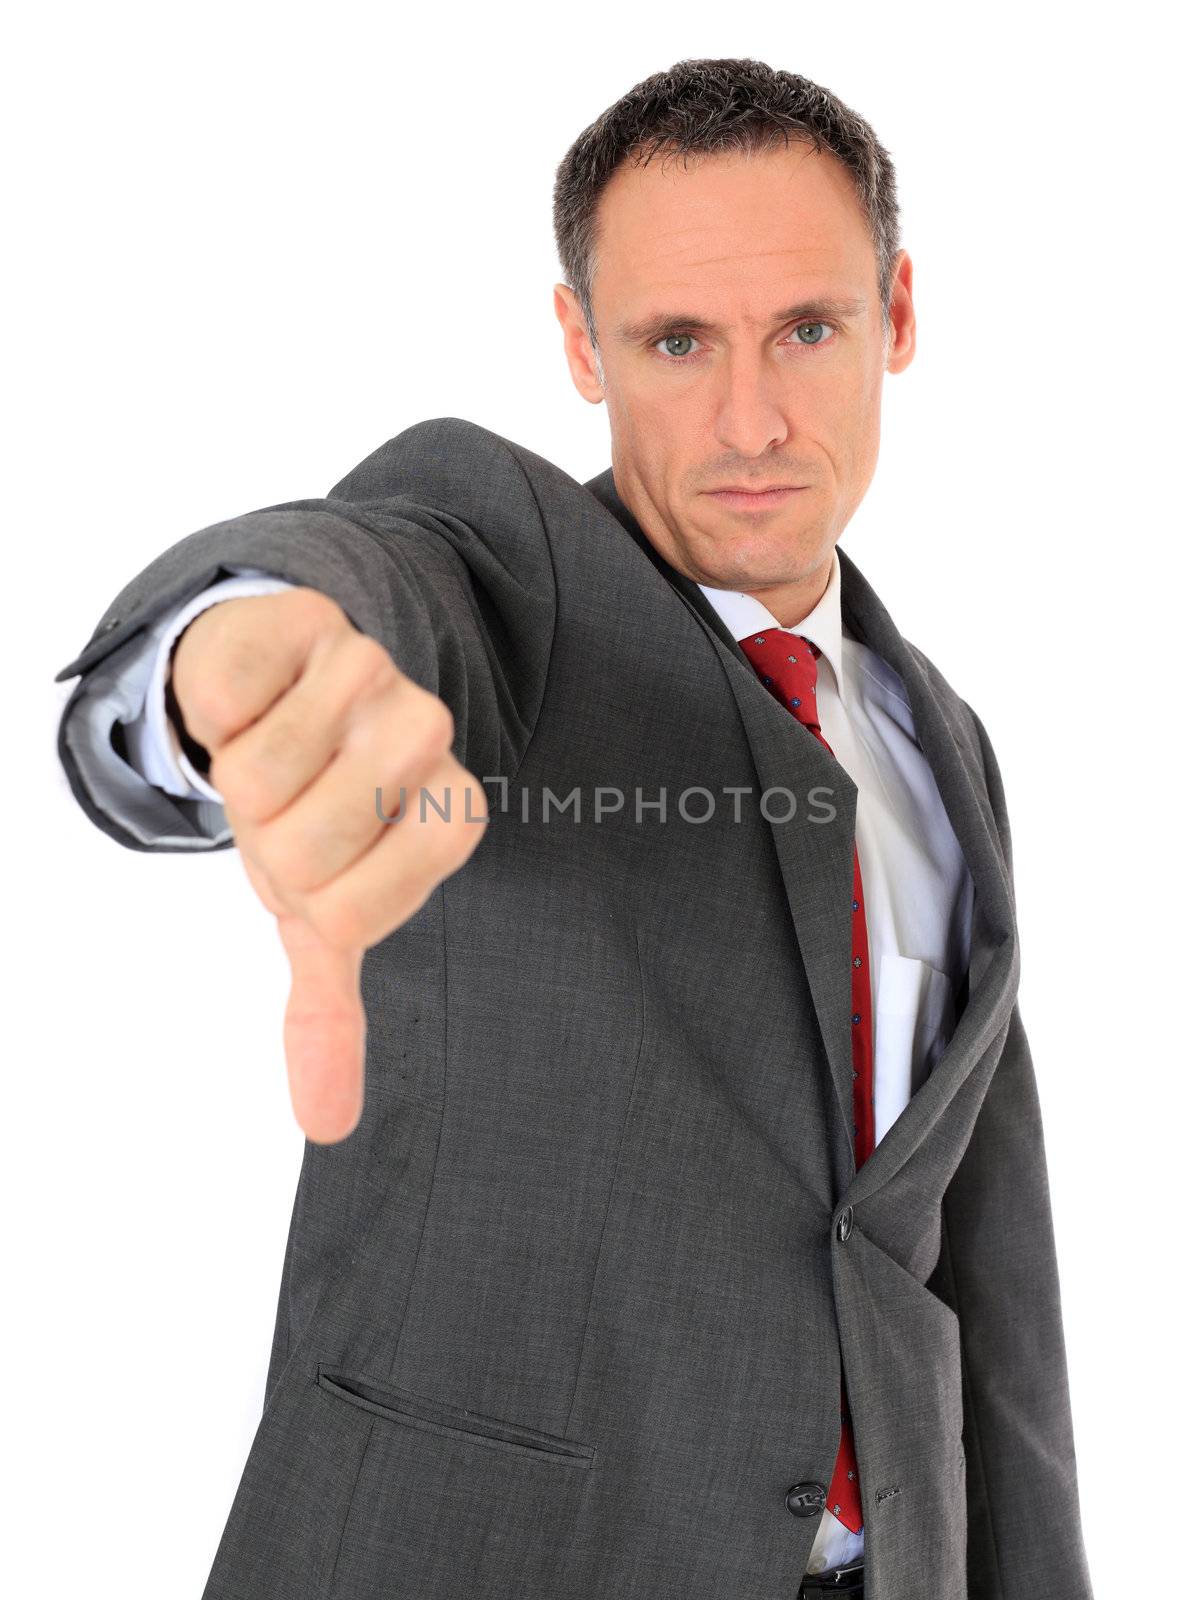 Attractive businessman making negative gesture. All on white background.